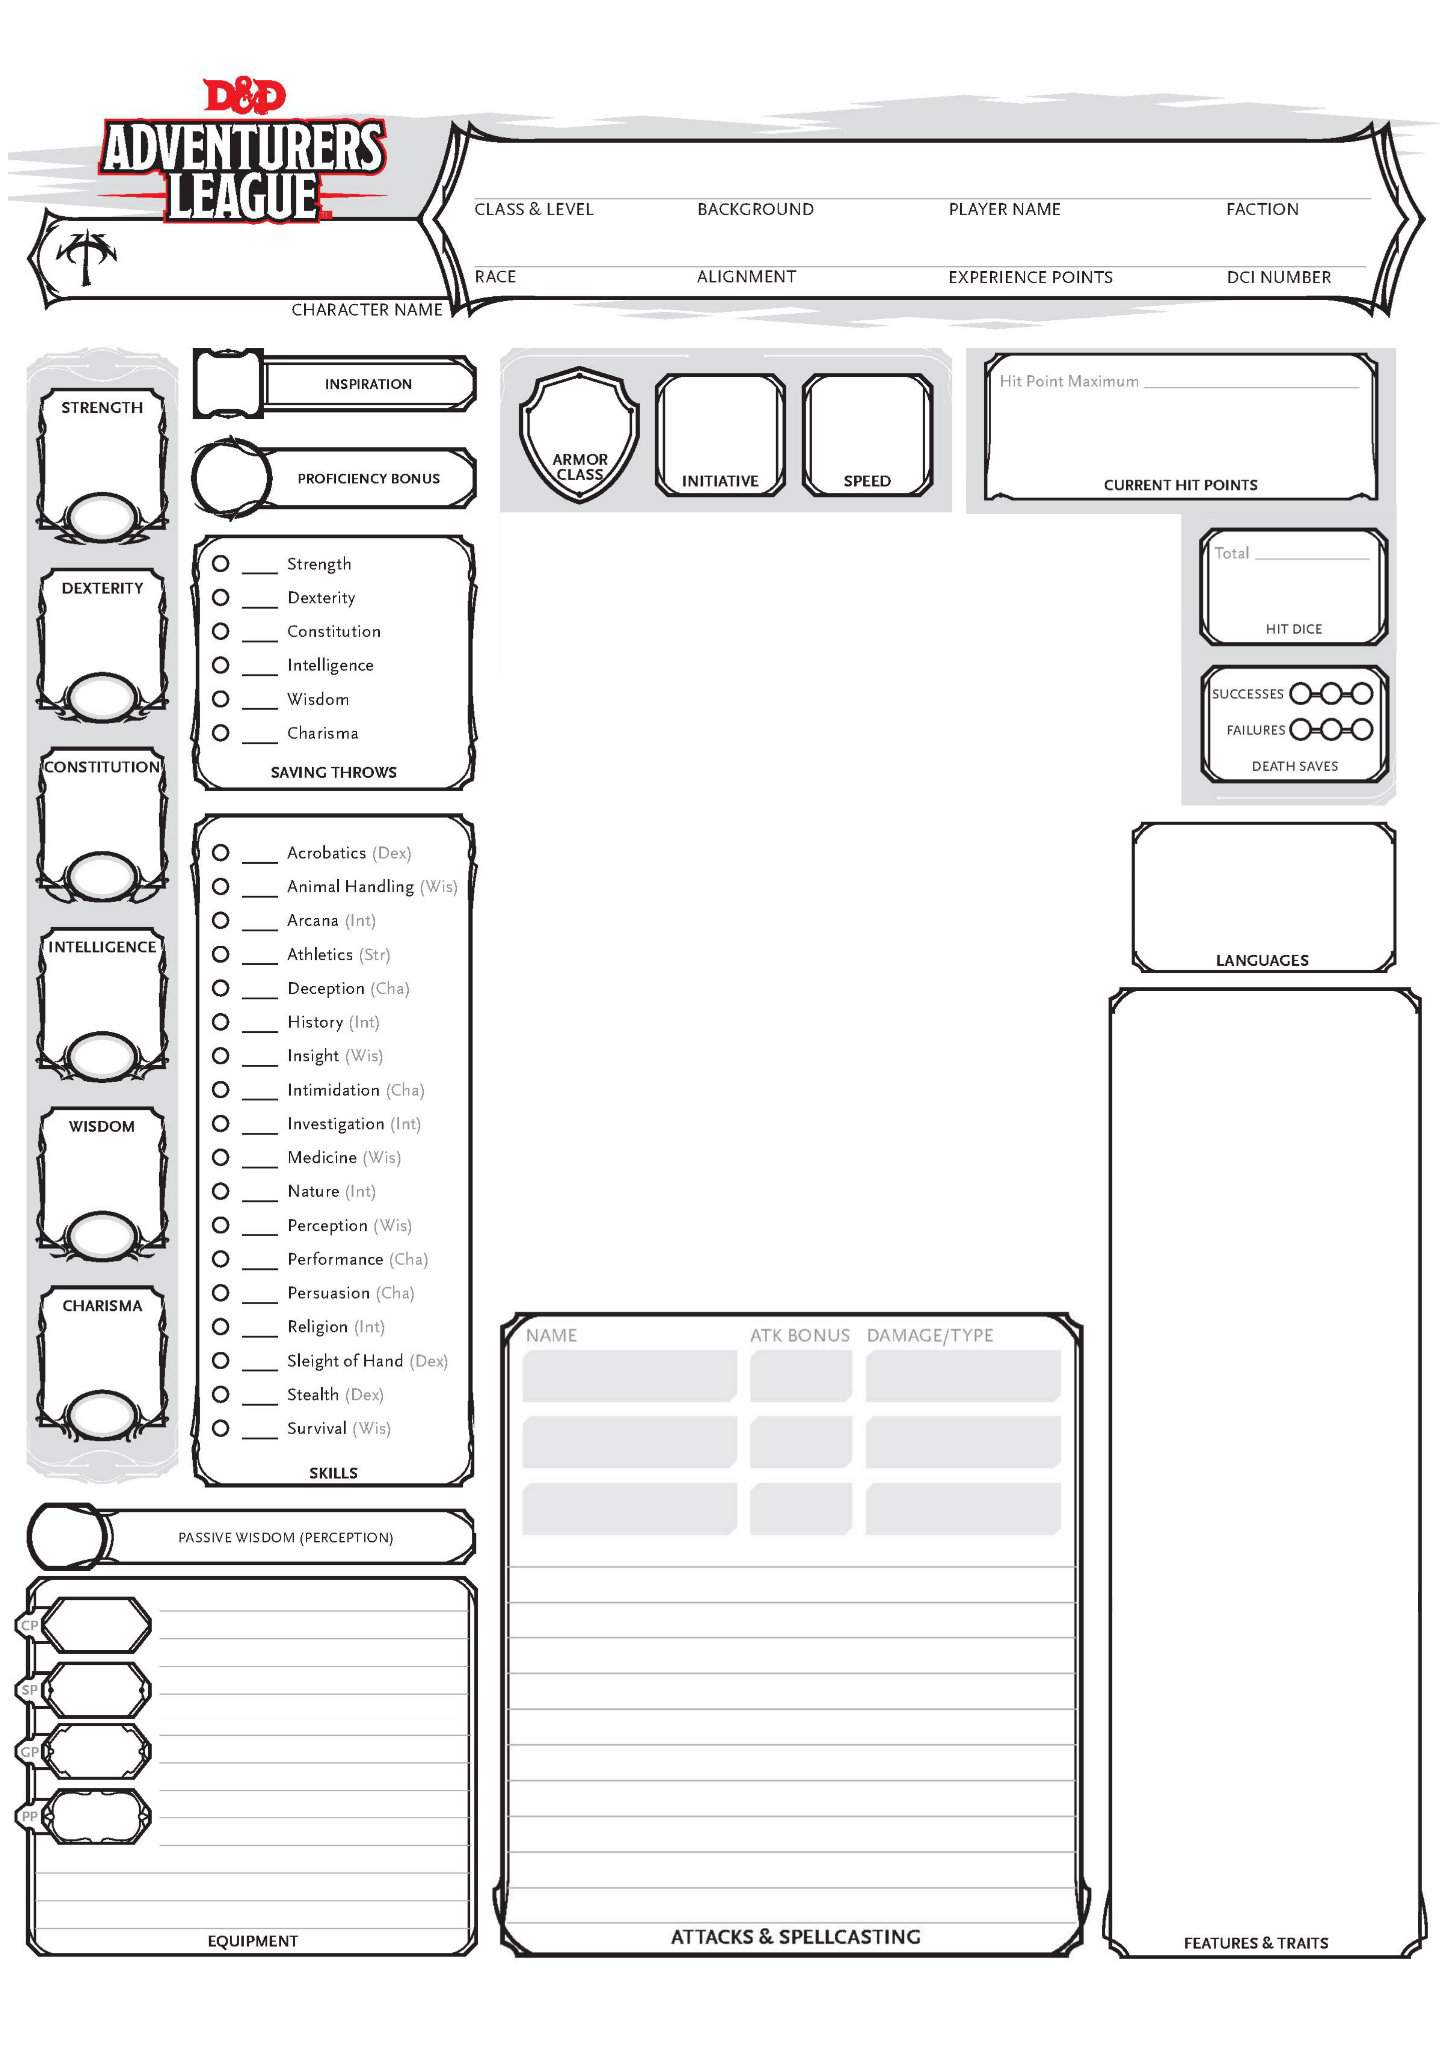 different-character-sheet-format-dungeons-dragons-d-d-amino